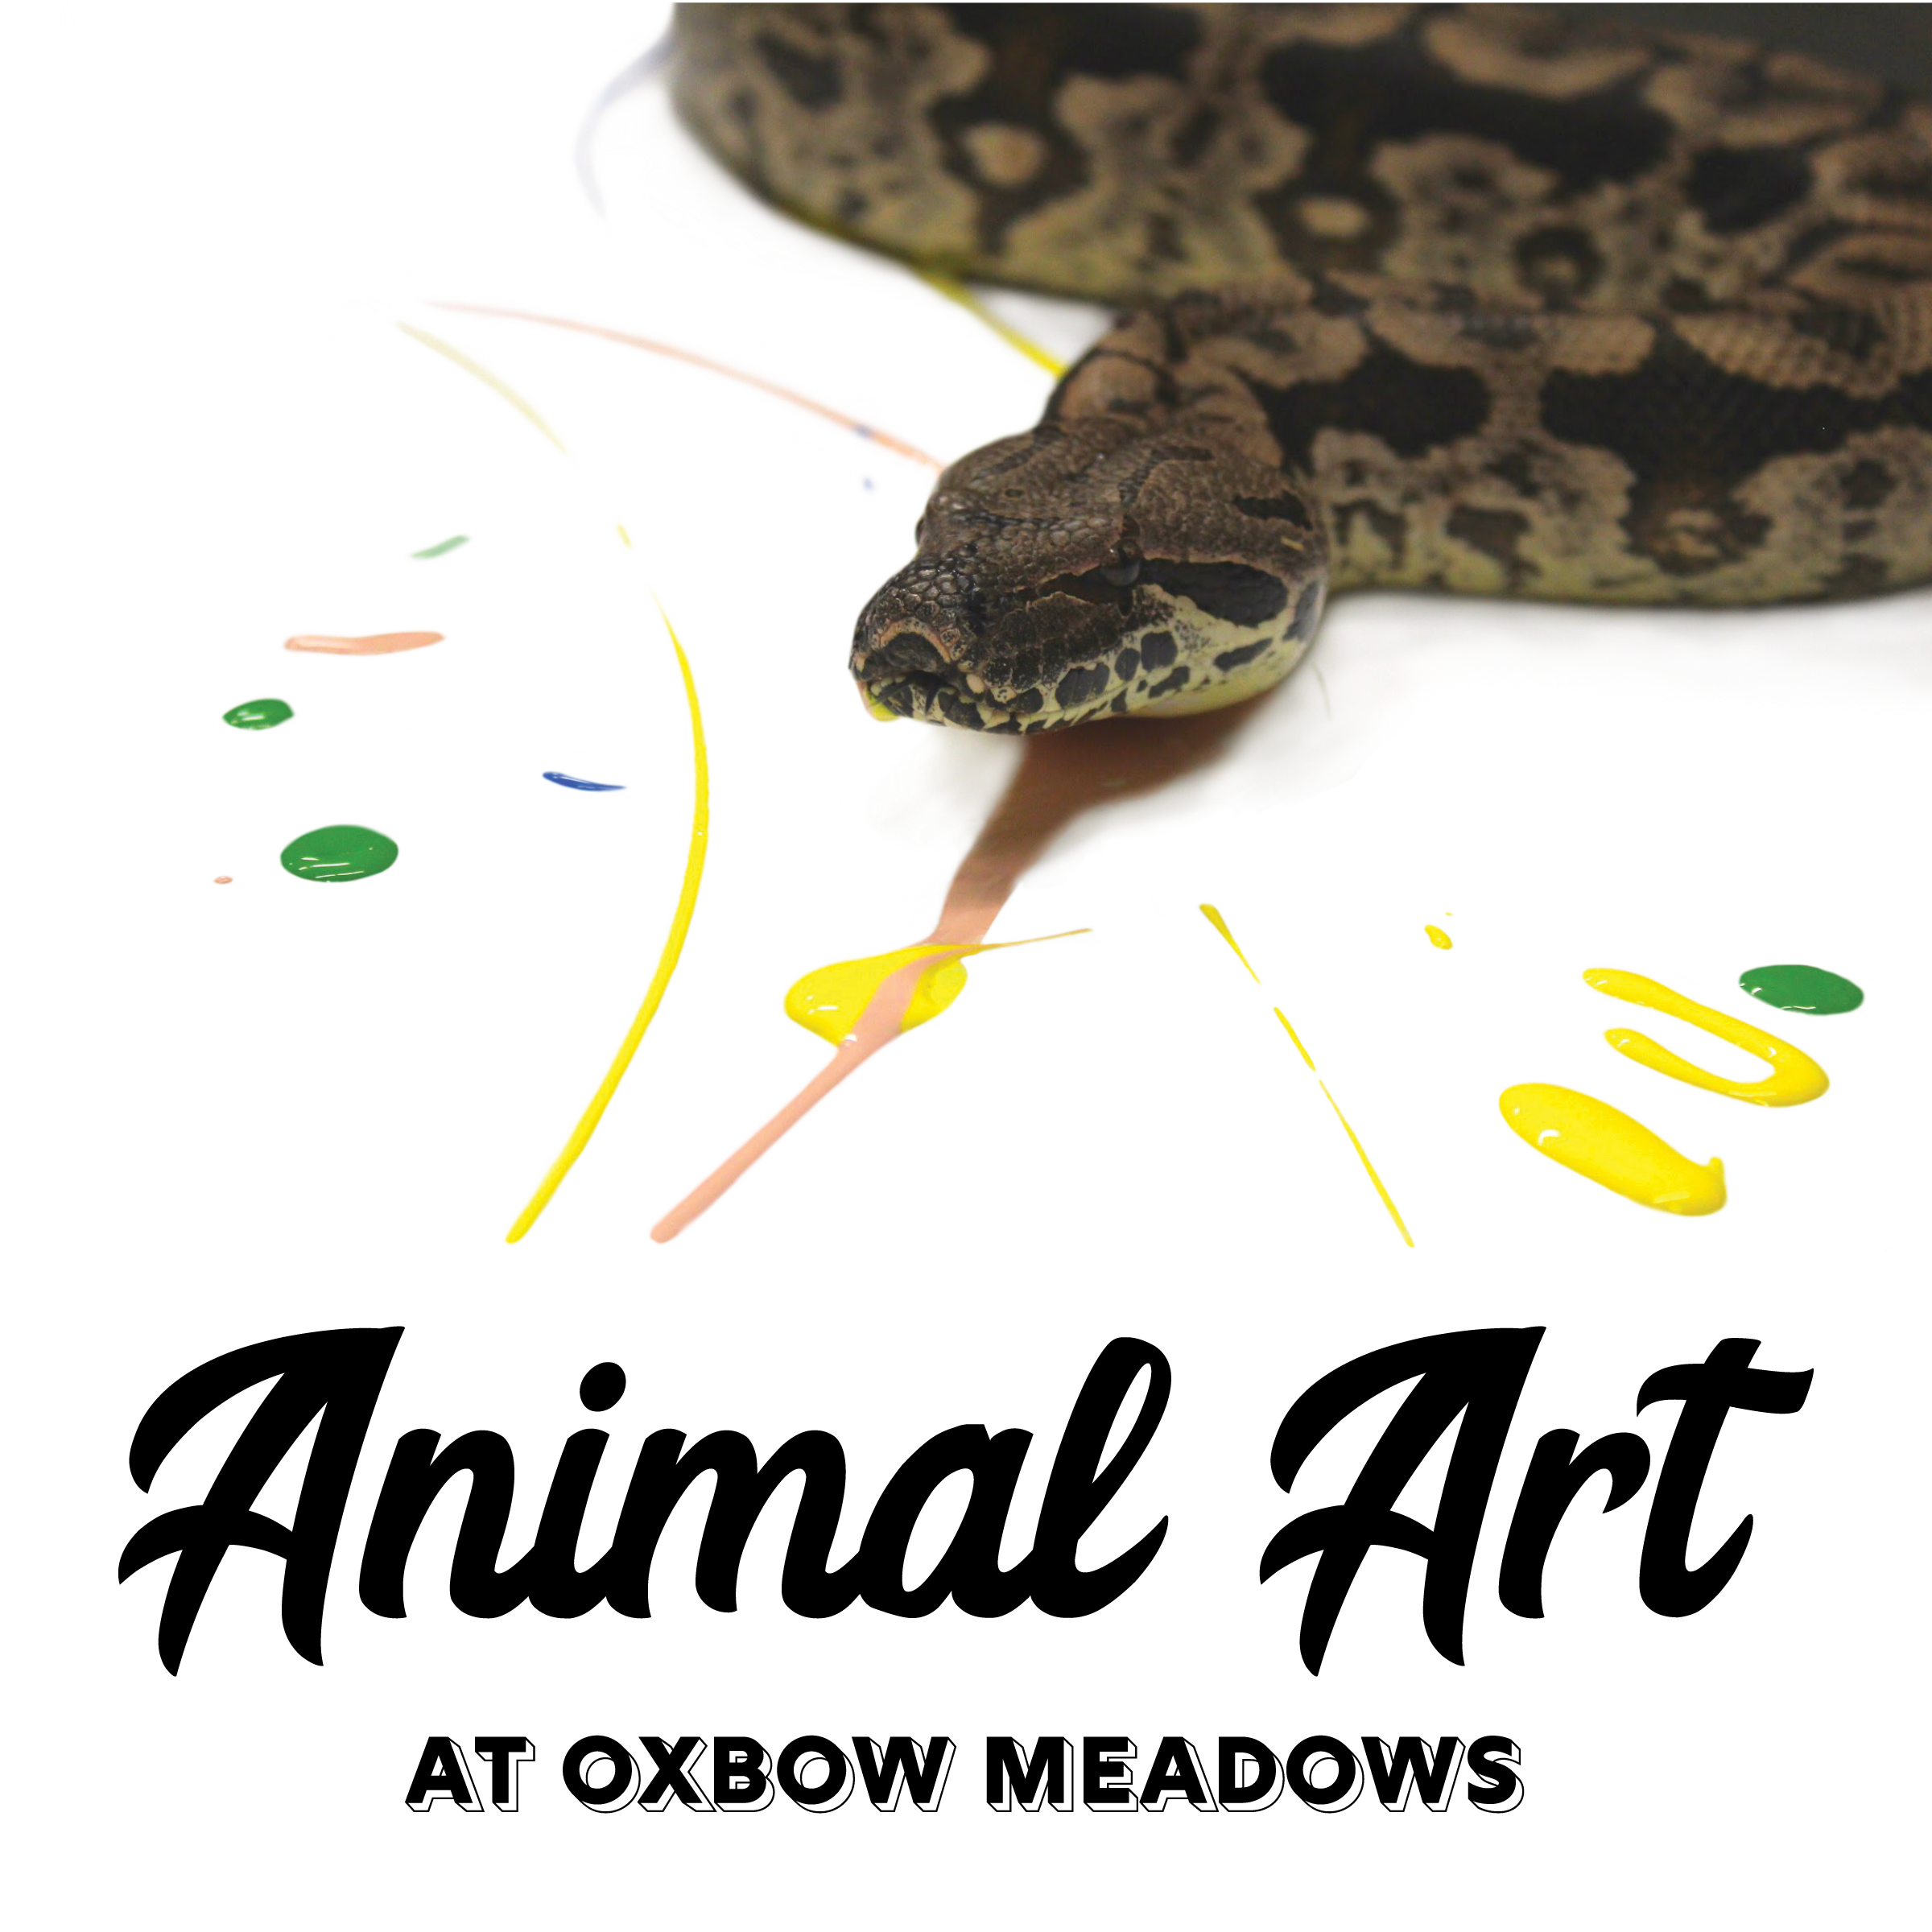 Image of a snake painting